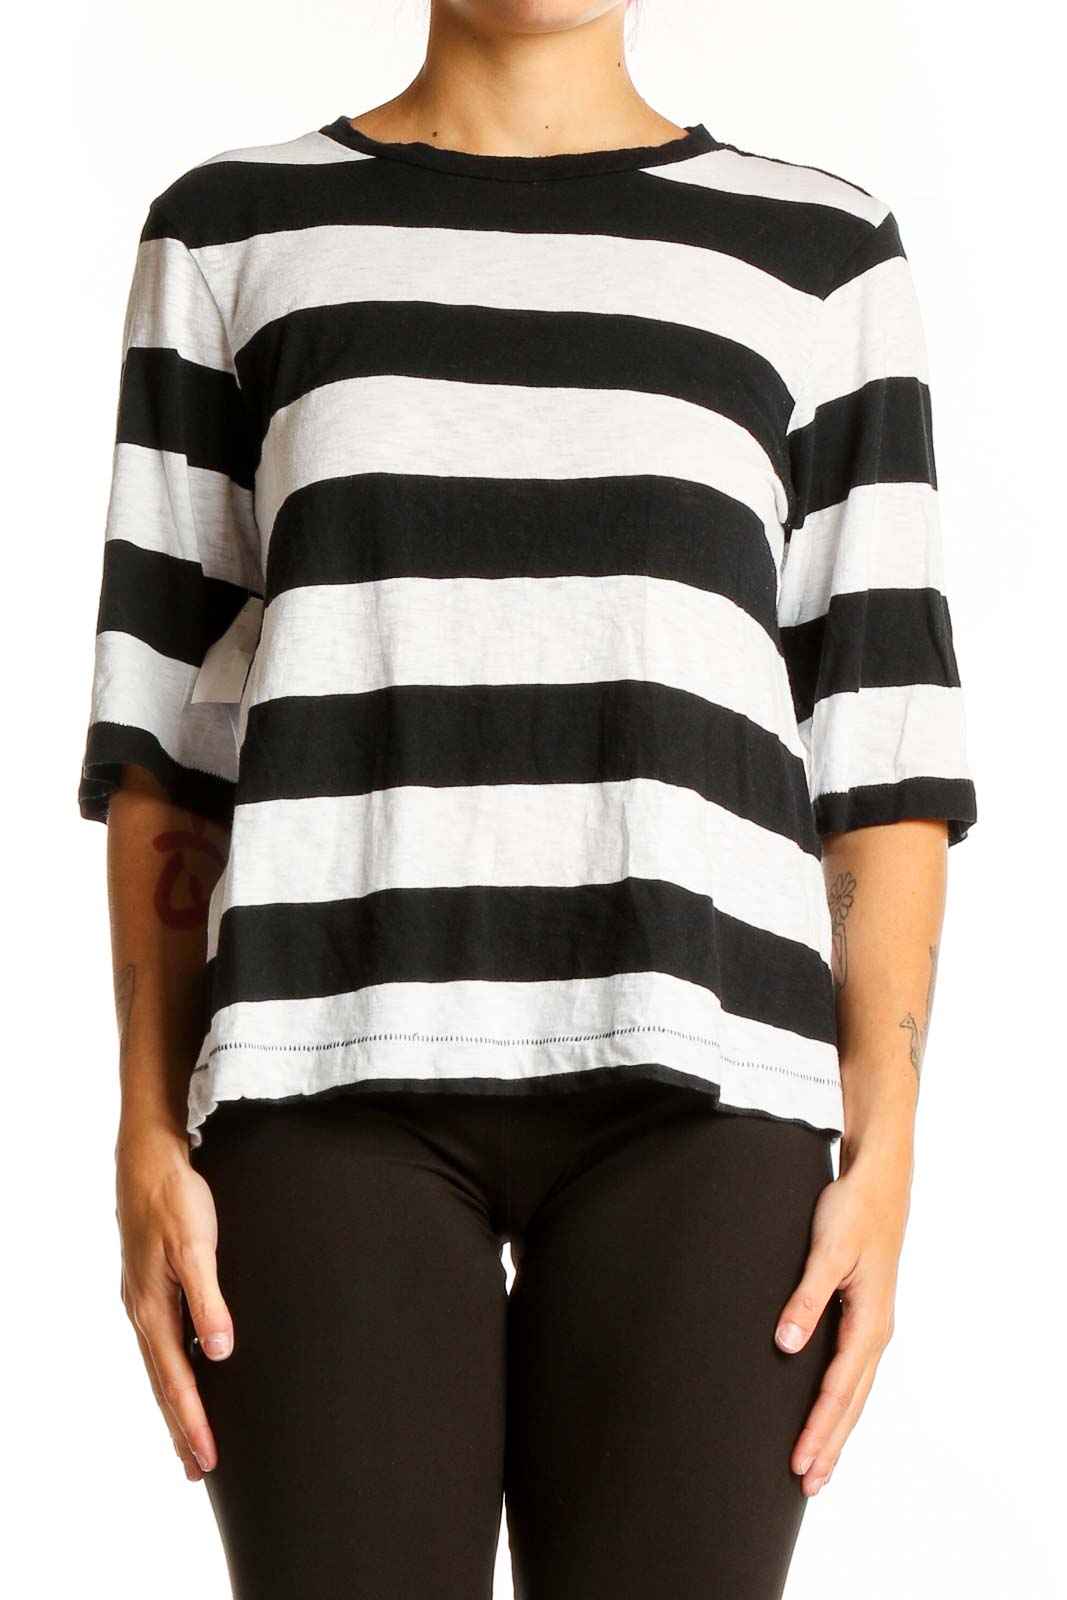 White Black Broad Stripes Top Front